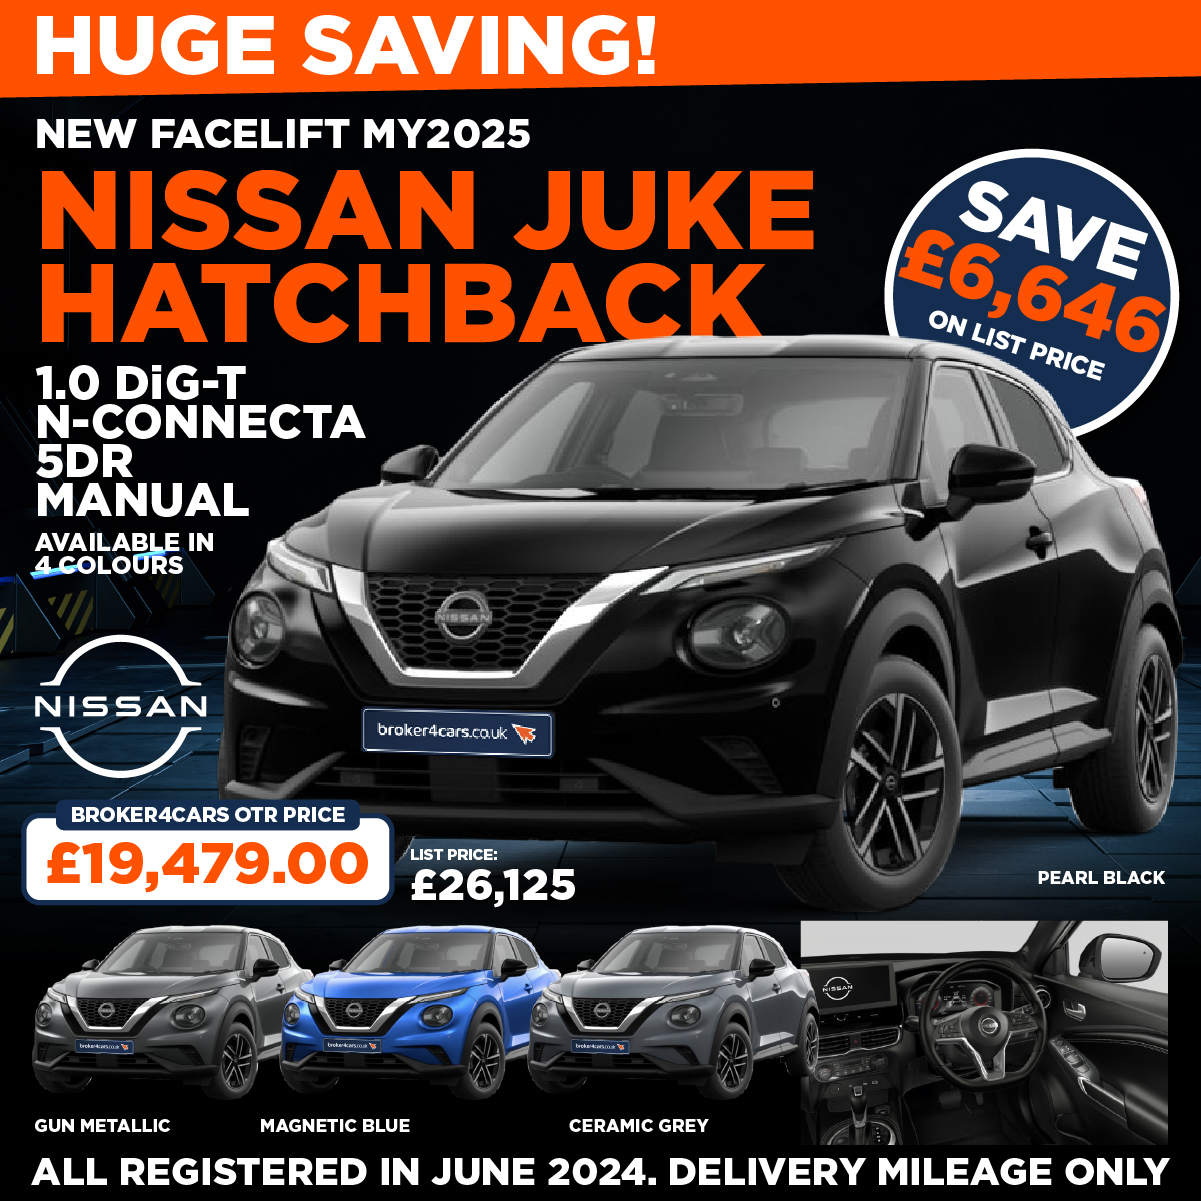 NEW FACELIFT MY2025 NISSAN JUKE HATCHBACK 1.0 DiG-T Tekna 5dr DCT Auto. Available in either Black, Iconic Yellow, Gun Metallic or Silver. All registered in June 2024. Delivery mileage only. List Price: £29,125. Save £7,027. Broker4Cars Price £22,098 OTR